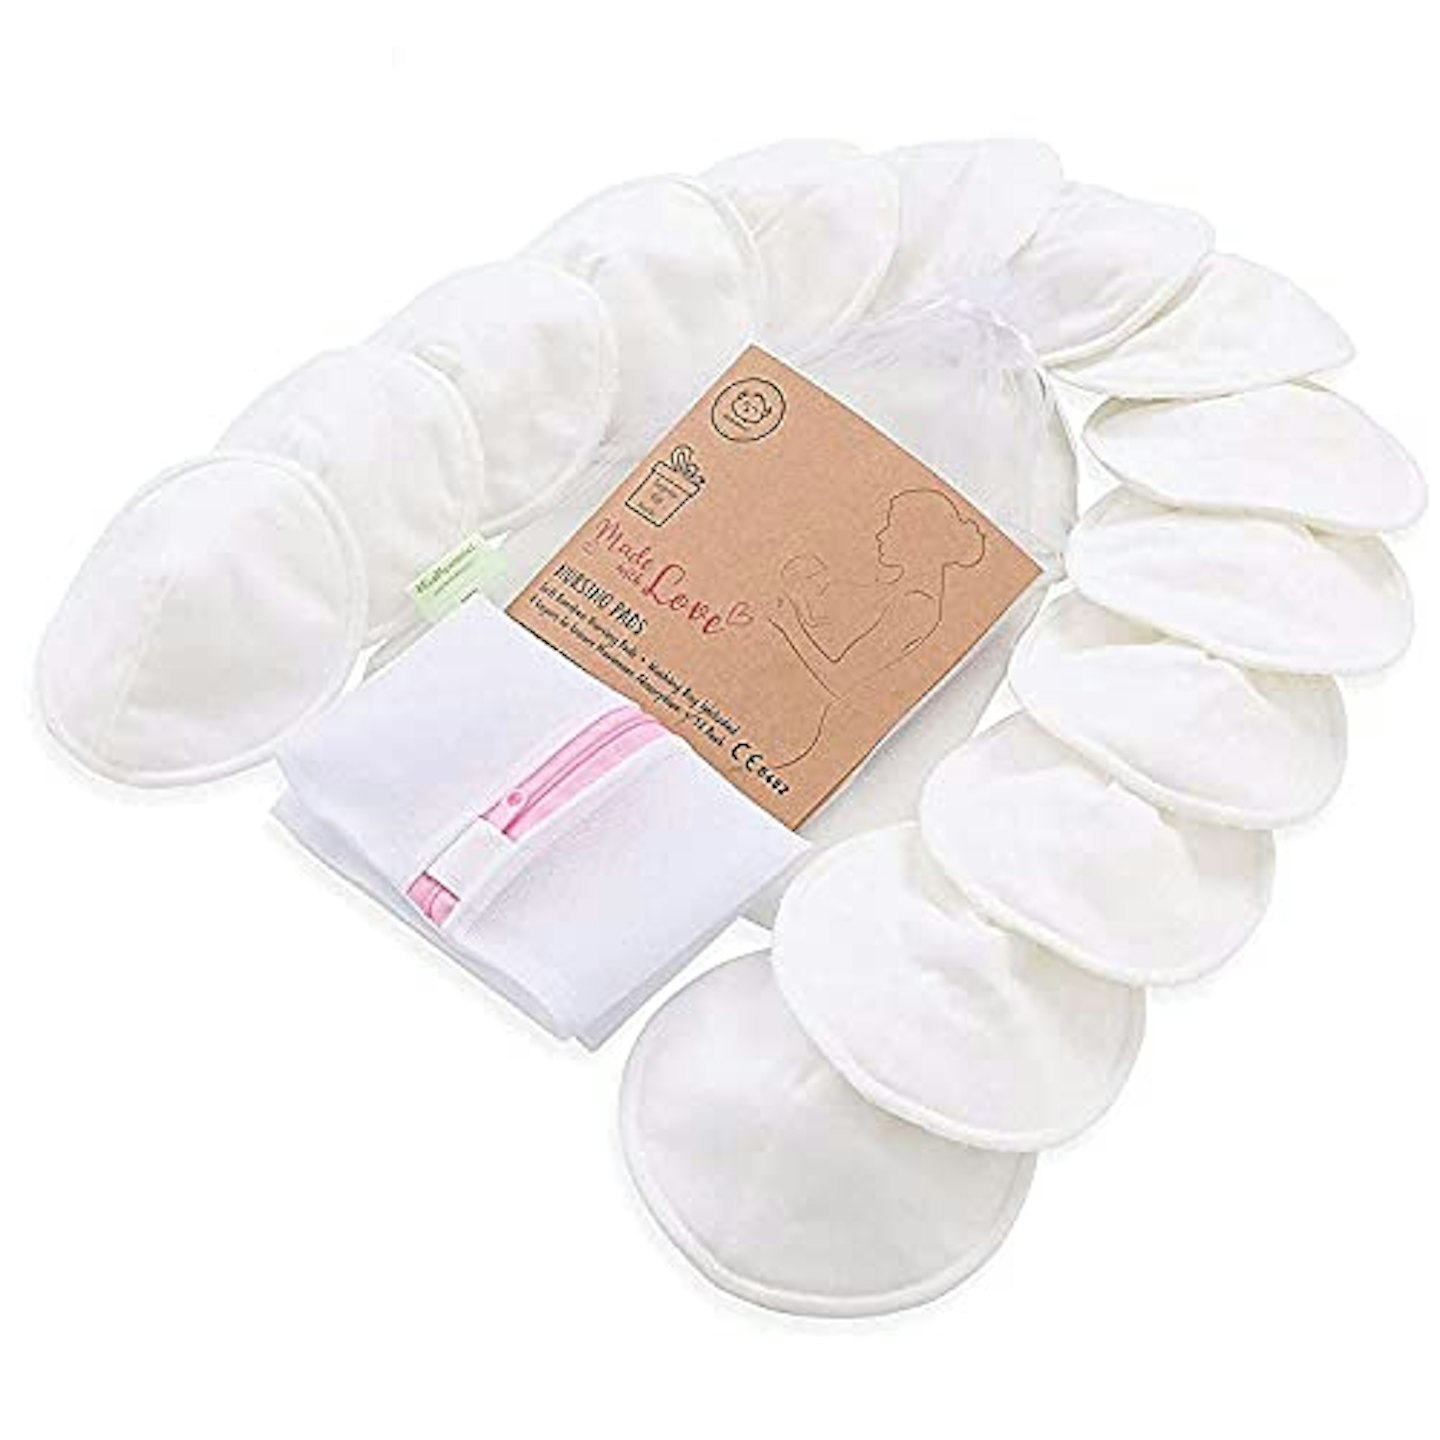 Reusable Nursing Pads for Breastfeeding, 14-Pack - 4-Layers Viscose from  Bamboo Nursing Pads, Breastfeeding Pads, Washable Breast Pads, Organic